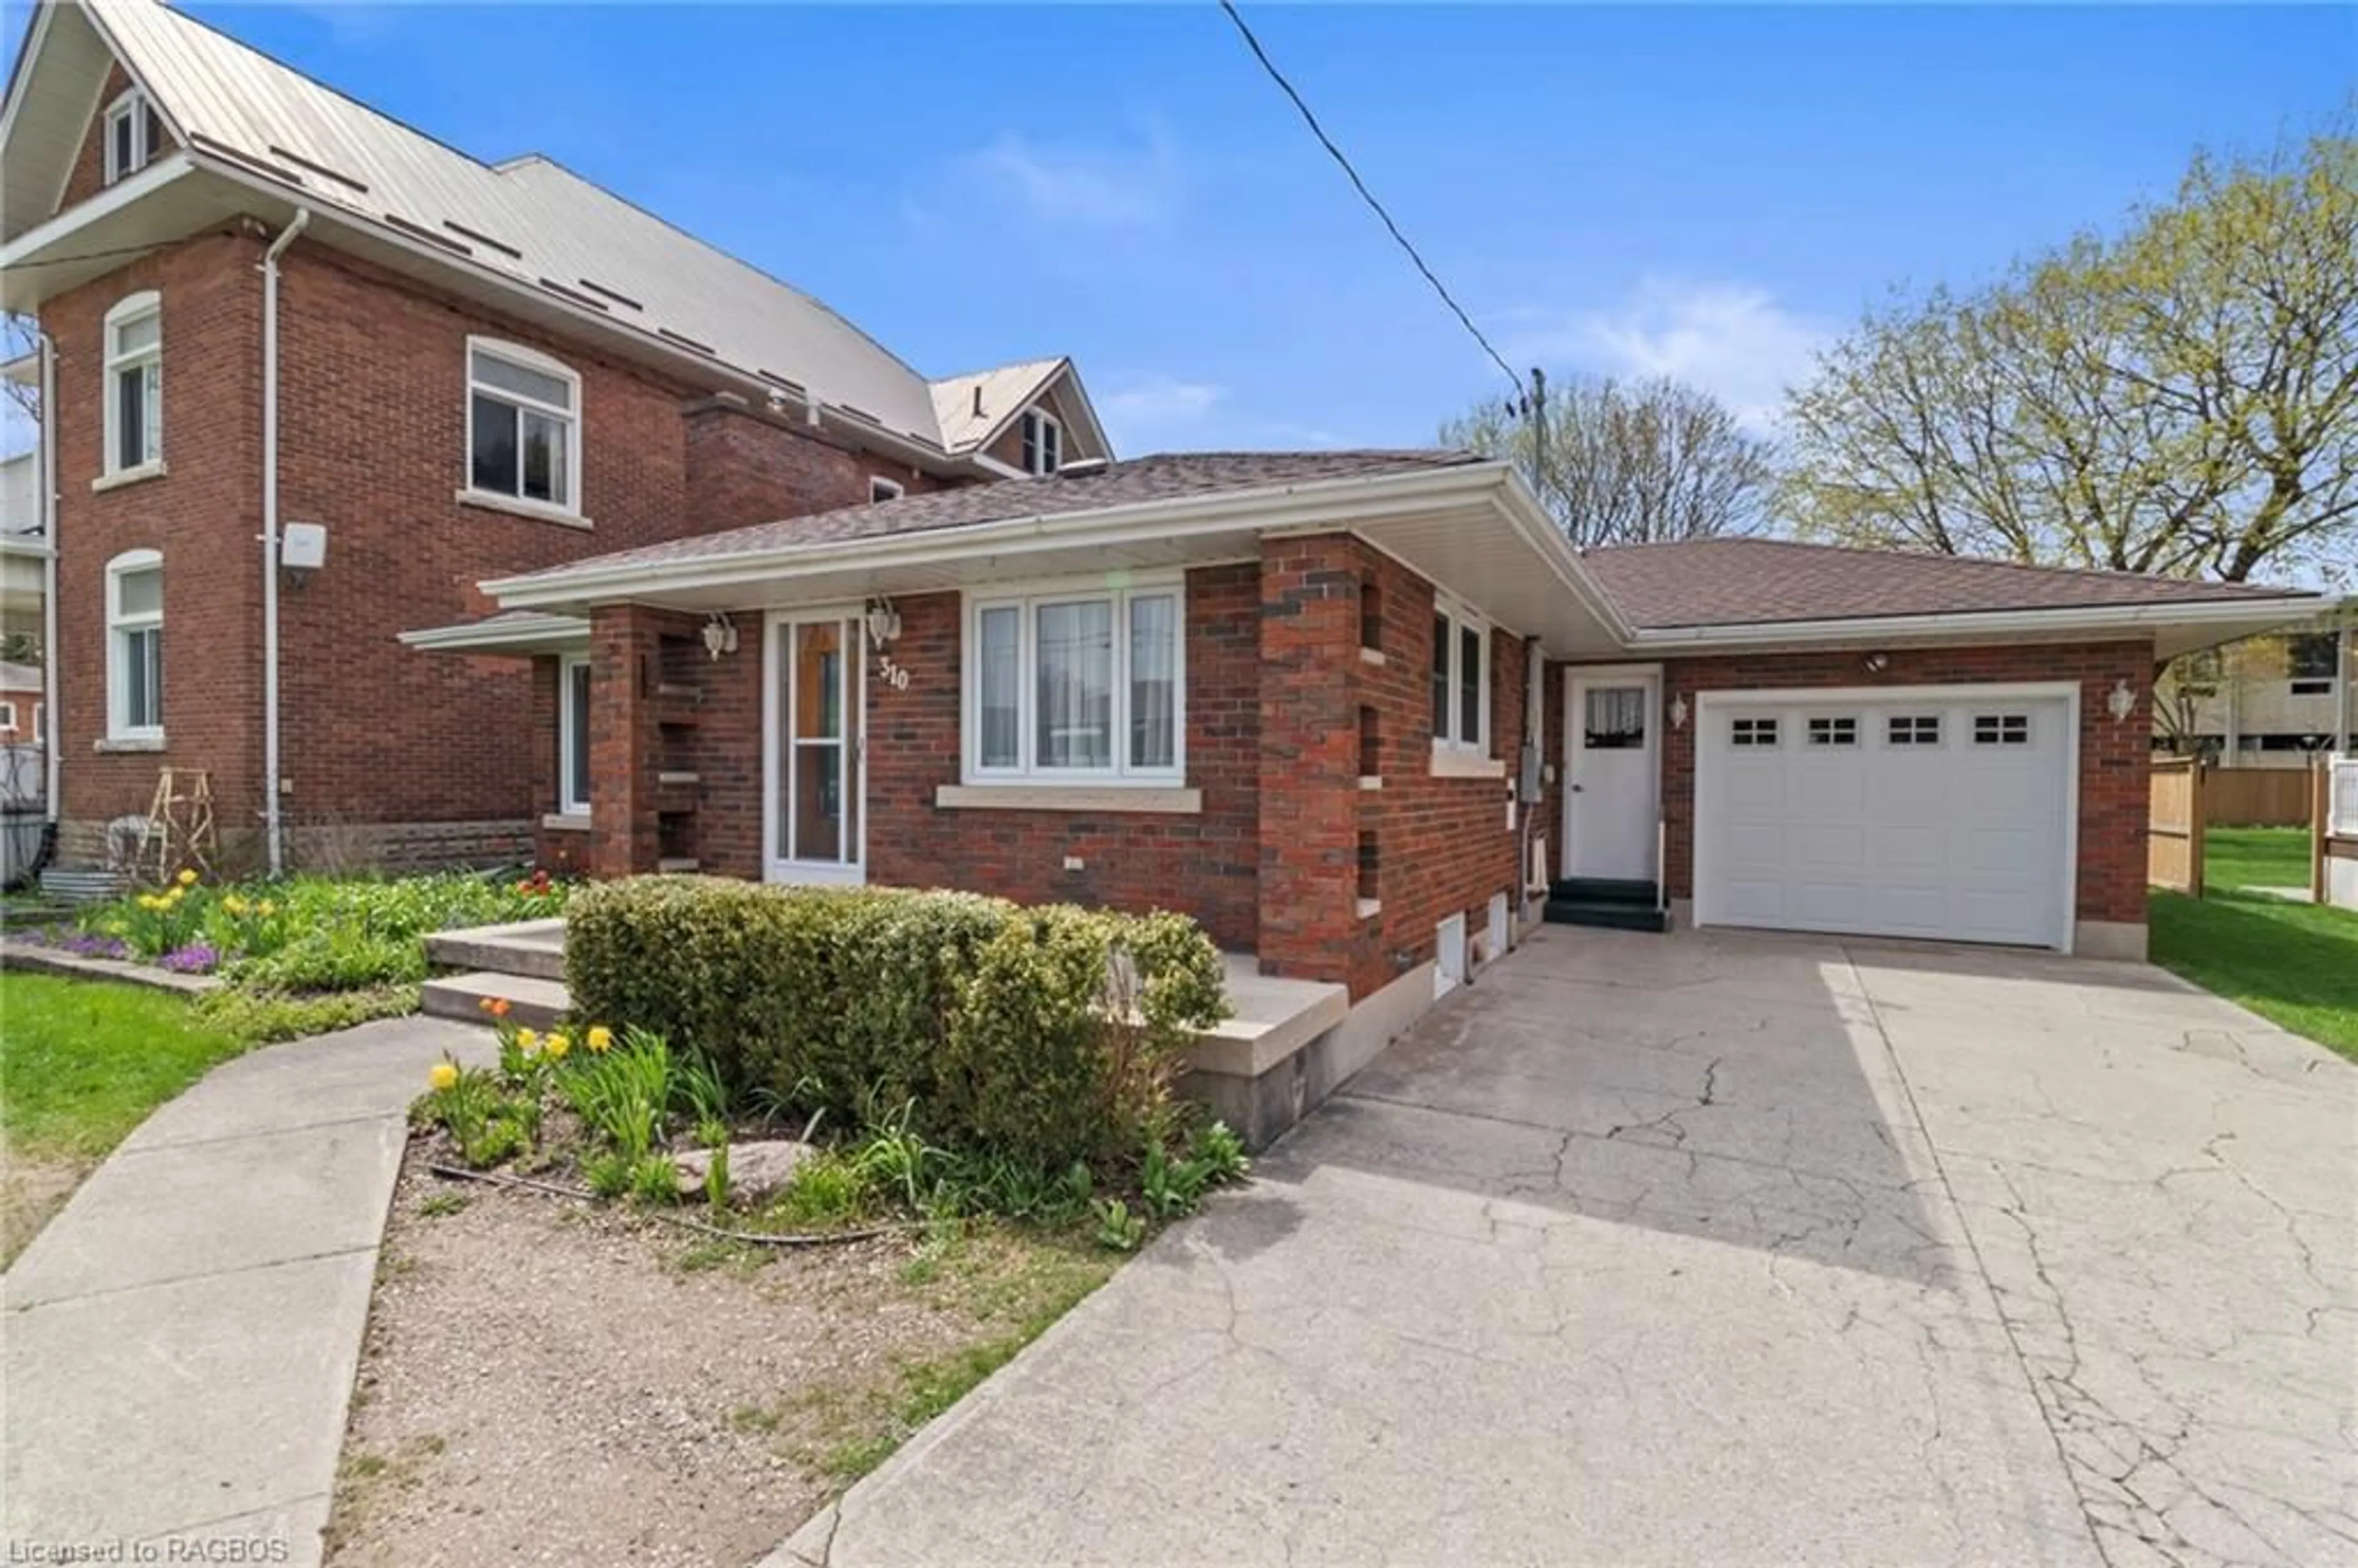 Home with brick exterior material for 310 7th Ave, Hanover Ontario N4N 2H7